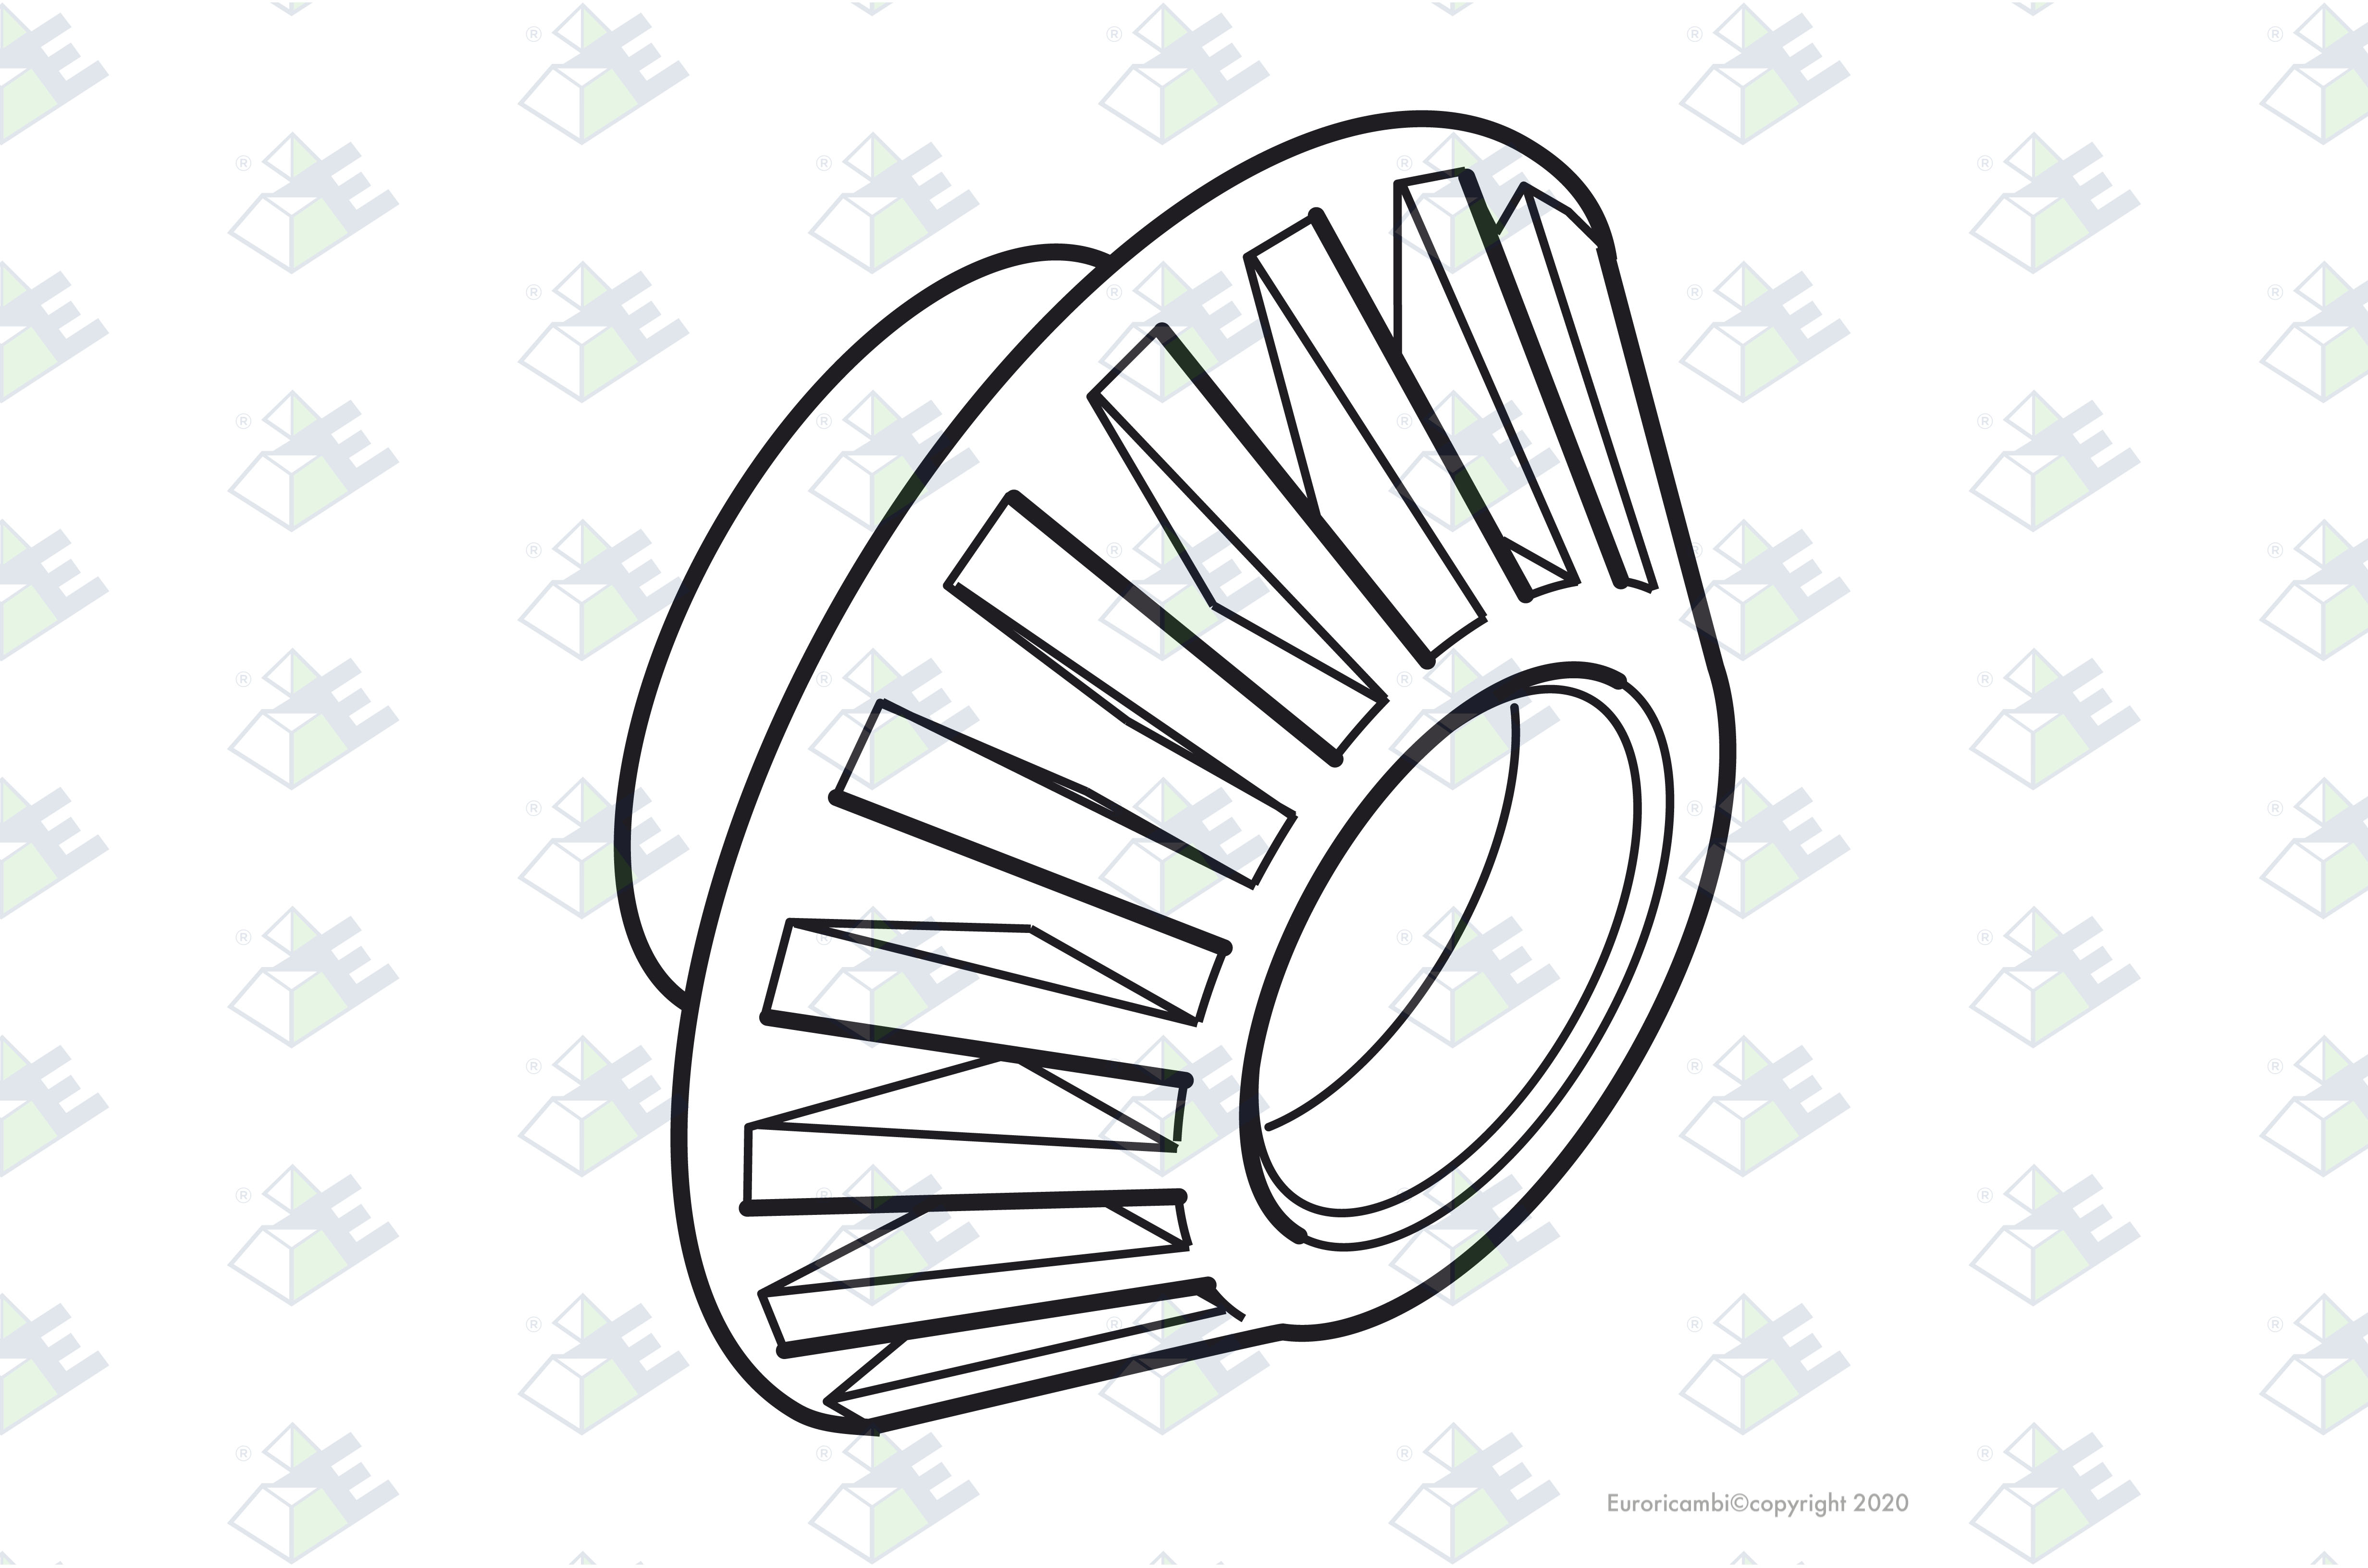 SIDE GEAR 16 T - 40 SPL. suitable to DAF 658089